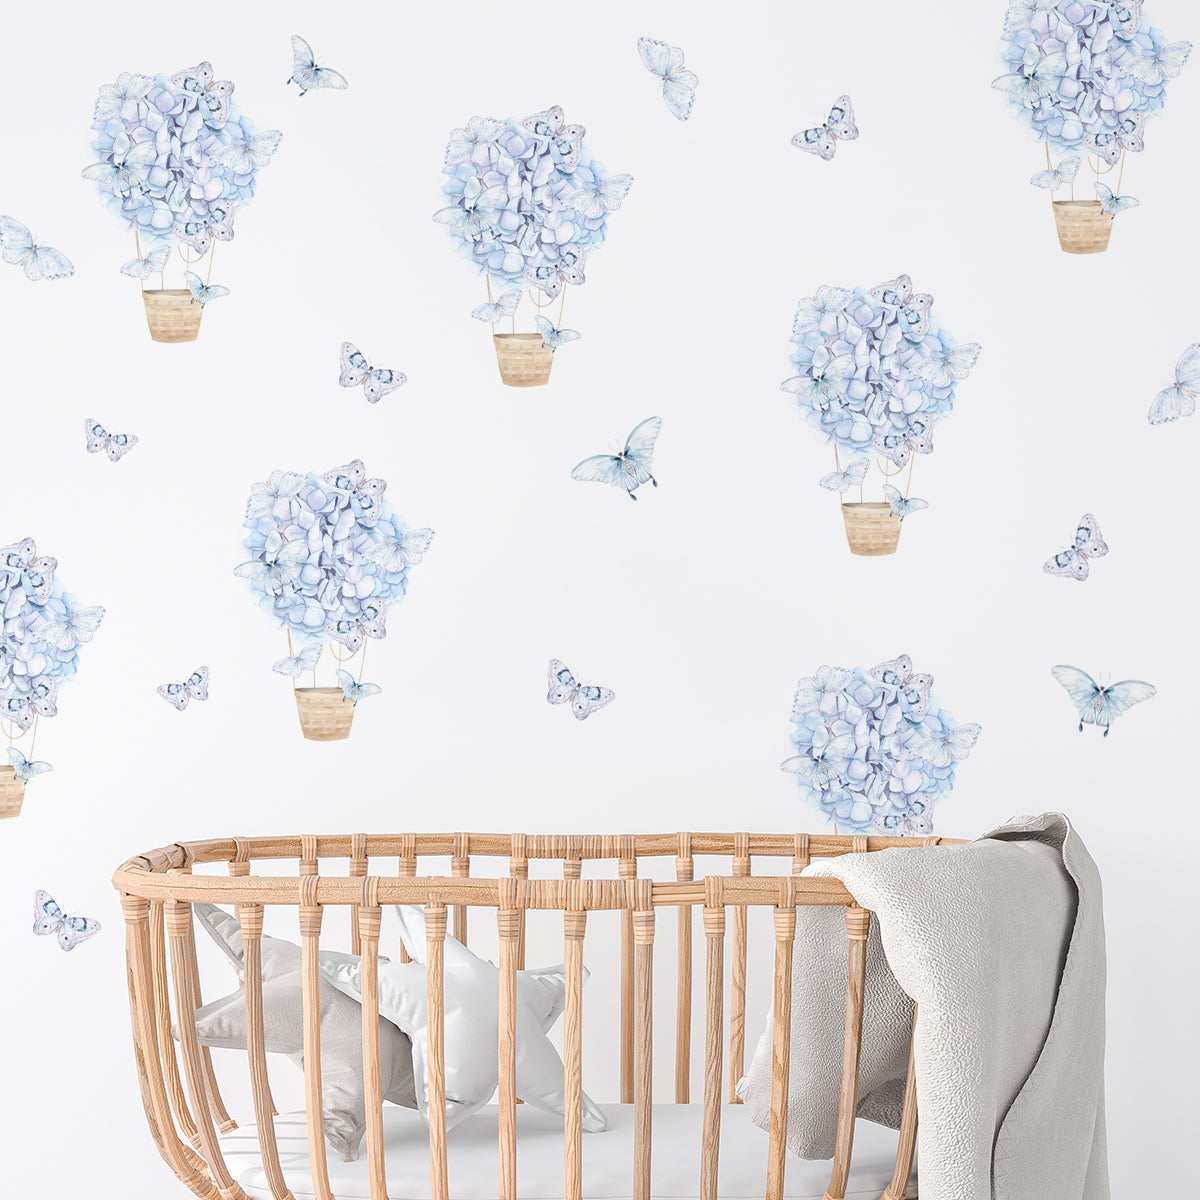 kids bedroom wall stickers, nursery wall stickers, wall stickers, wall decal , wall tattoo, floral hot air balloons with butterflies wall sticker, hot air balloon wall sticker, blue butterflies wall sticker, butterflies wall sticker, girls wall sticker, wall stickers with butterflies, scandinavian wall stickers, kids bedroom ideas, nursery ideas, nordic wall stickers, wall decor ideas